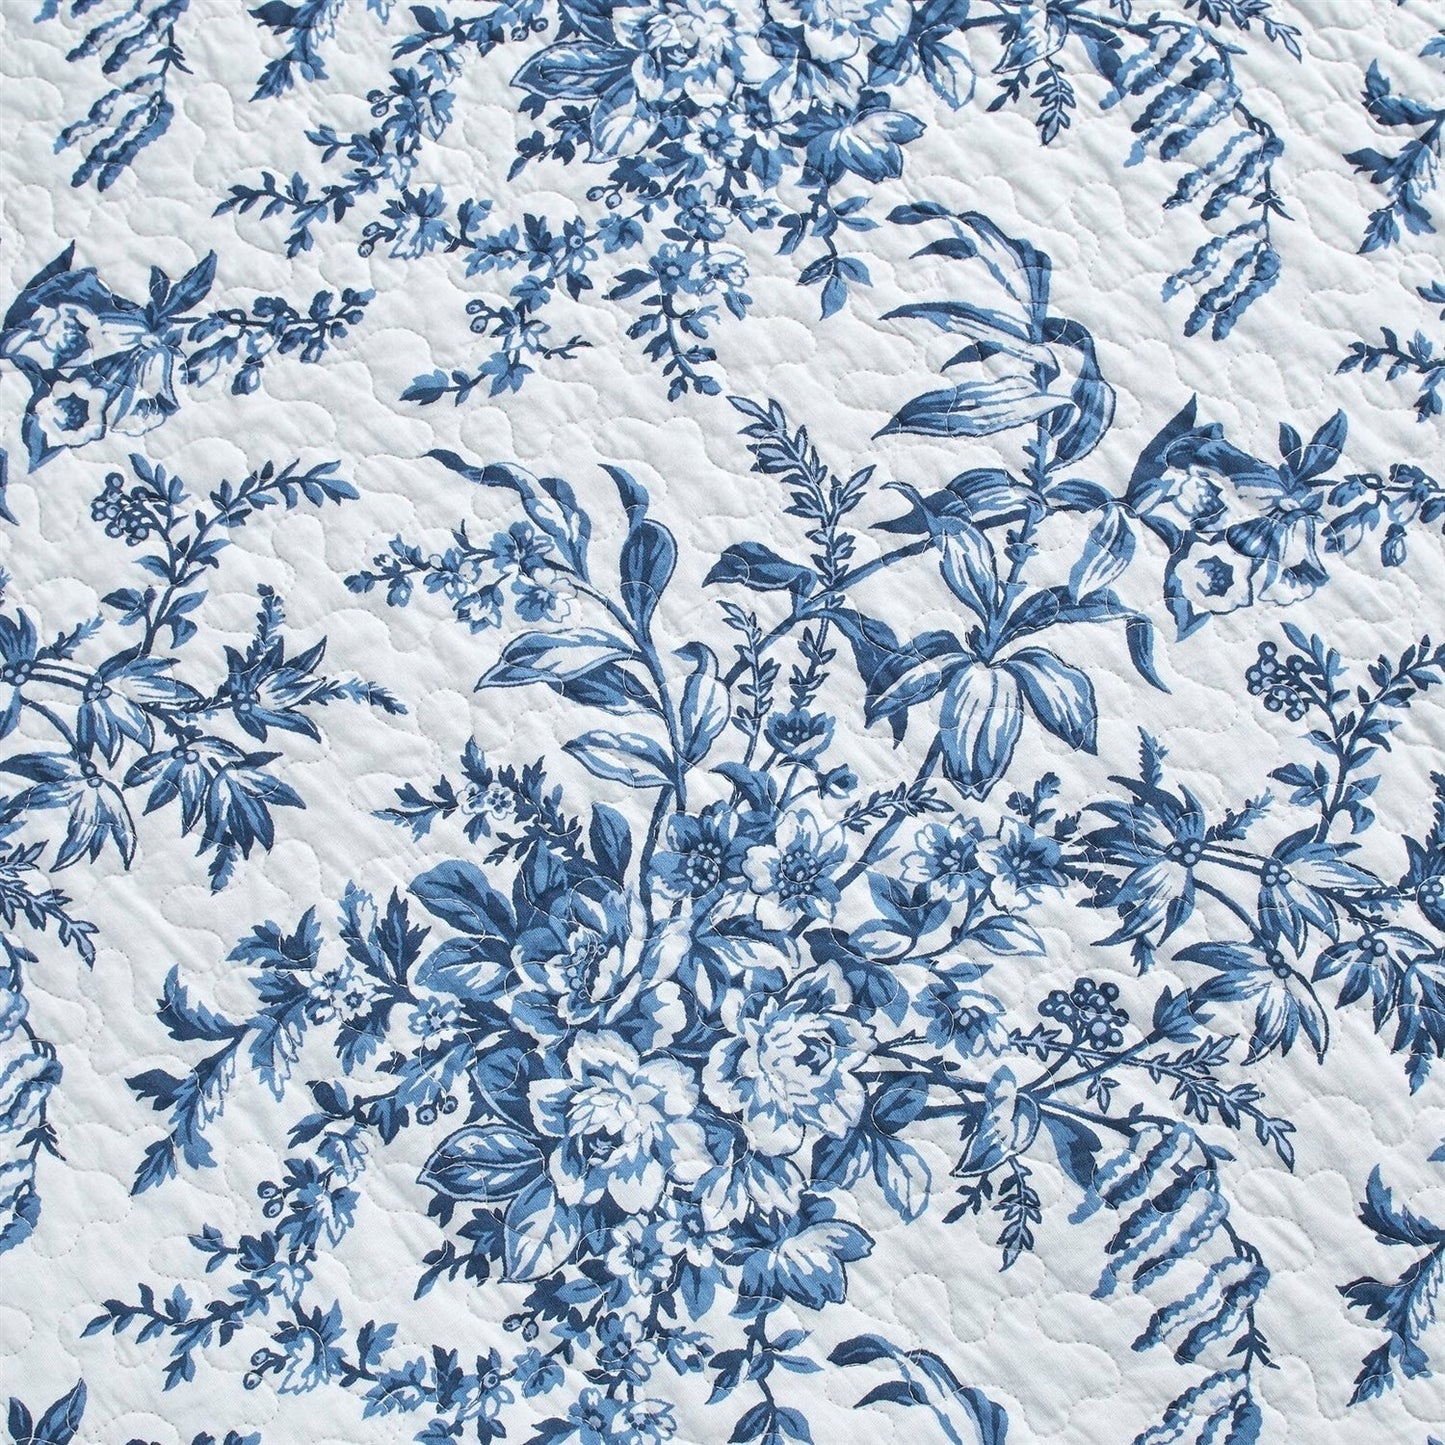 Bathroom > Laundry Hampers - Full/Queen 3 Piece Bed In A Bag Reversible Blue White Floral Cotton Quilt Set